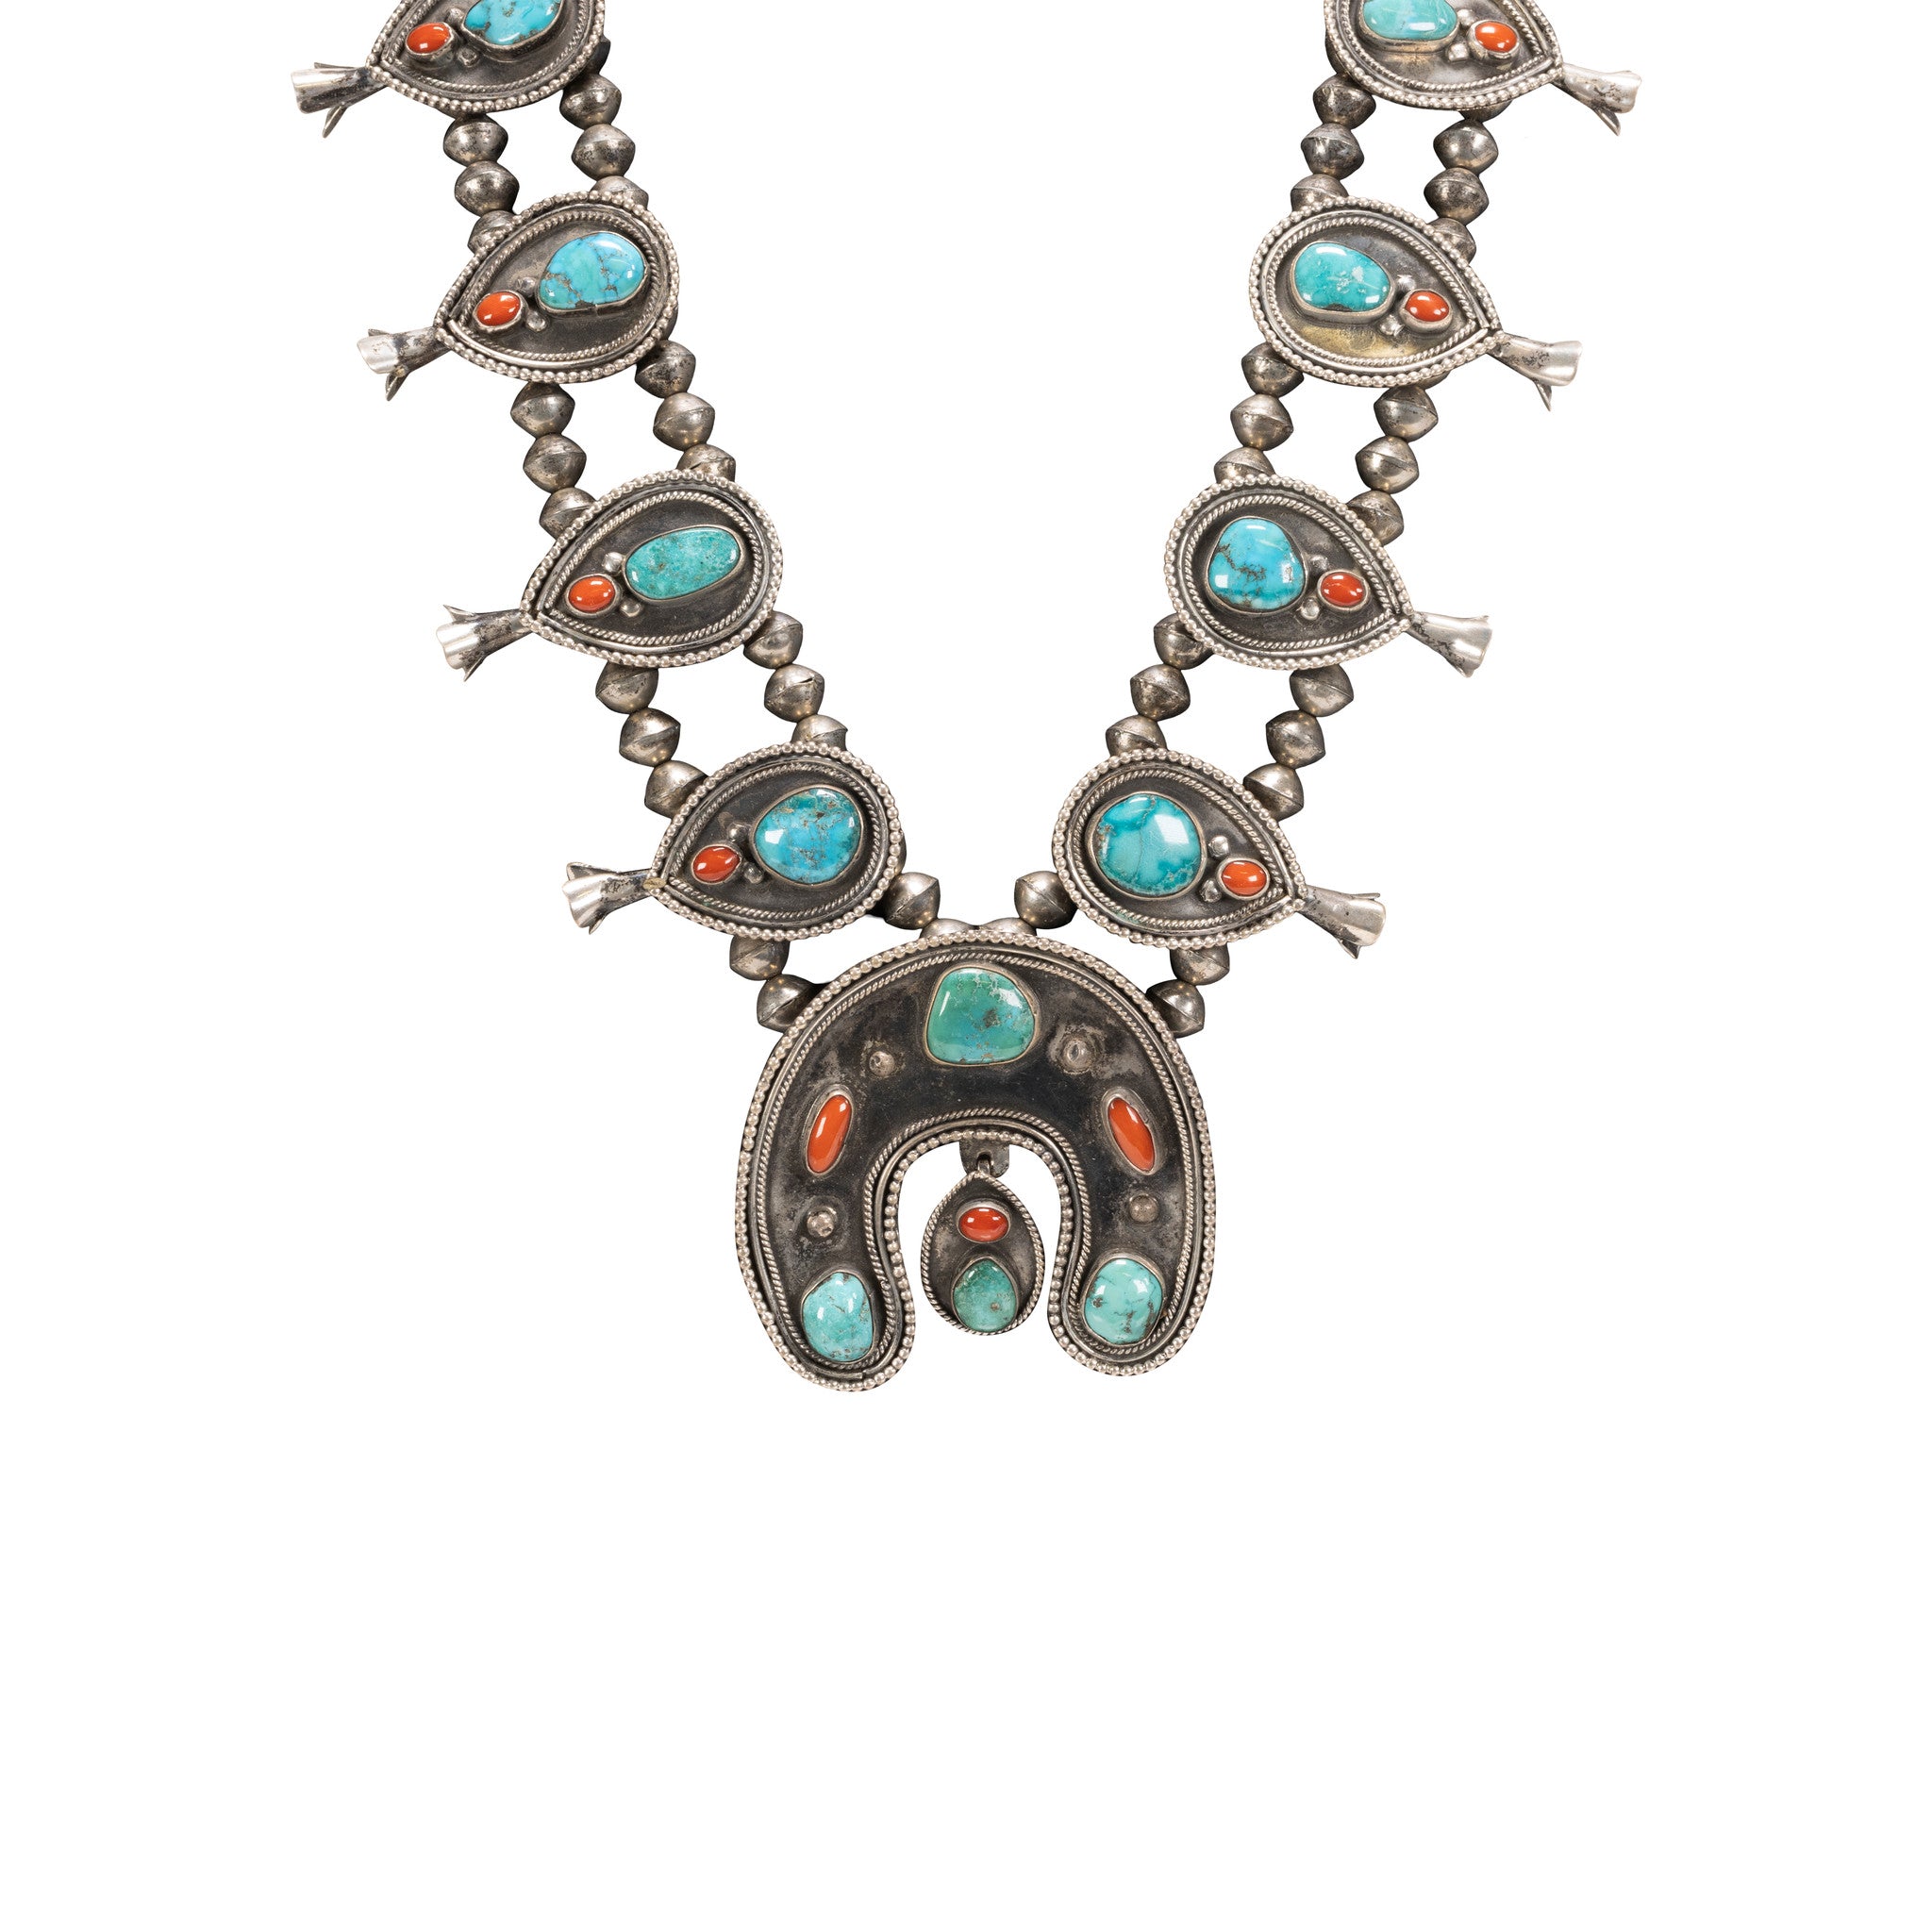 Coral and Turquoise Squash Blossom Necklace